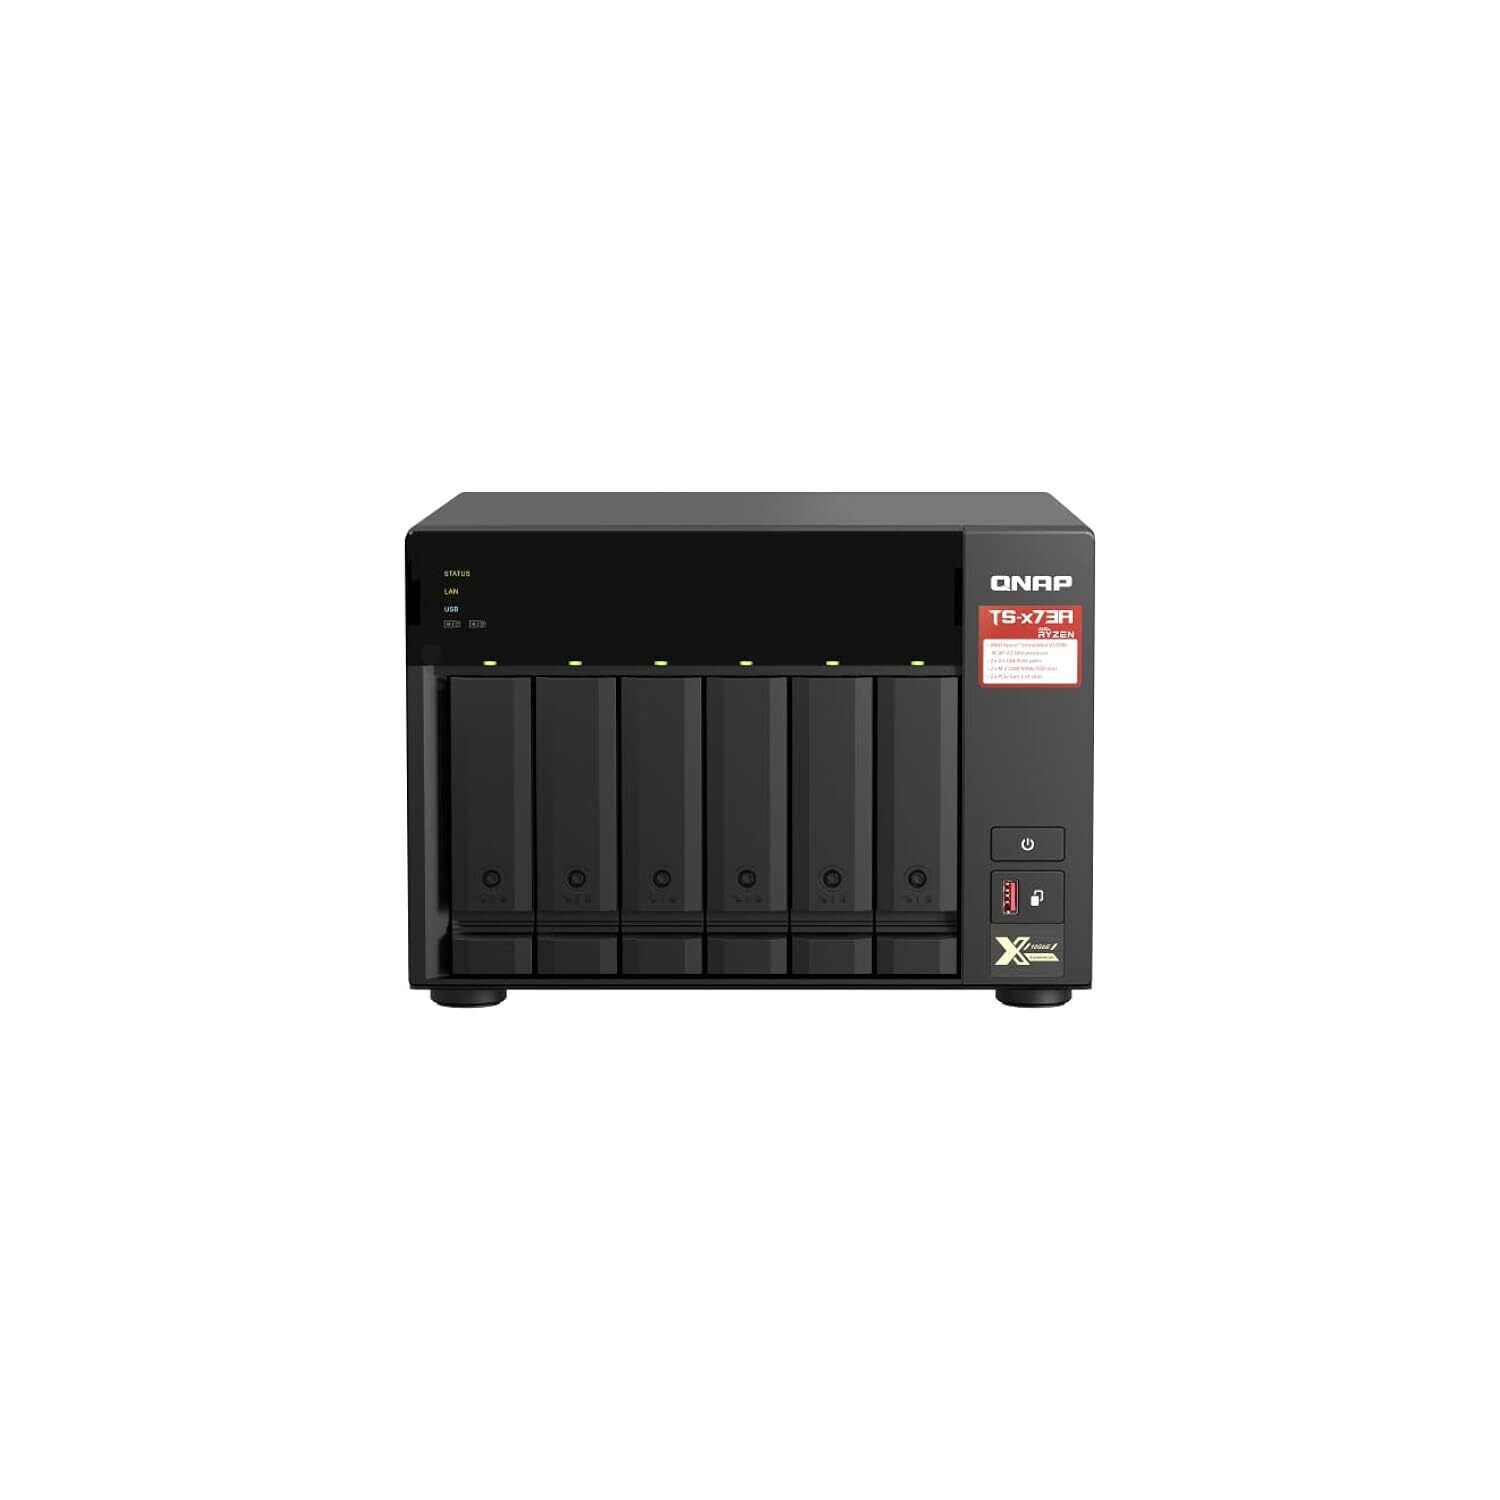 QNAP TS-673A-8G 6 Bay High-Performance NAS with 2 x 2.5GbE Ports and Two PCIe